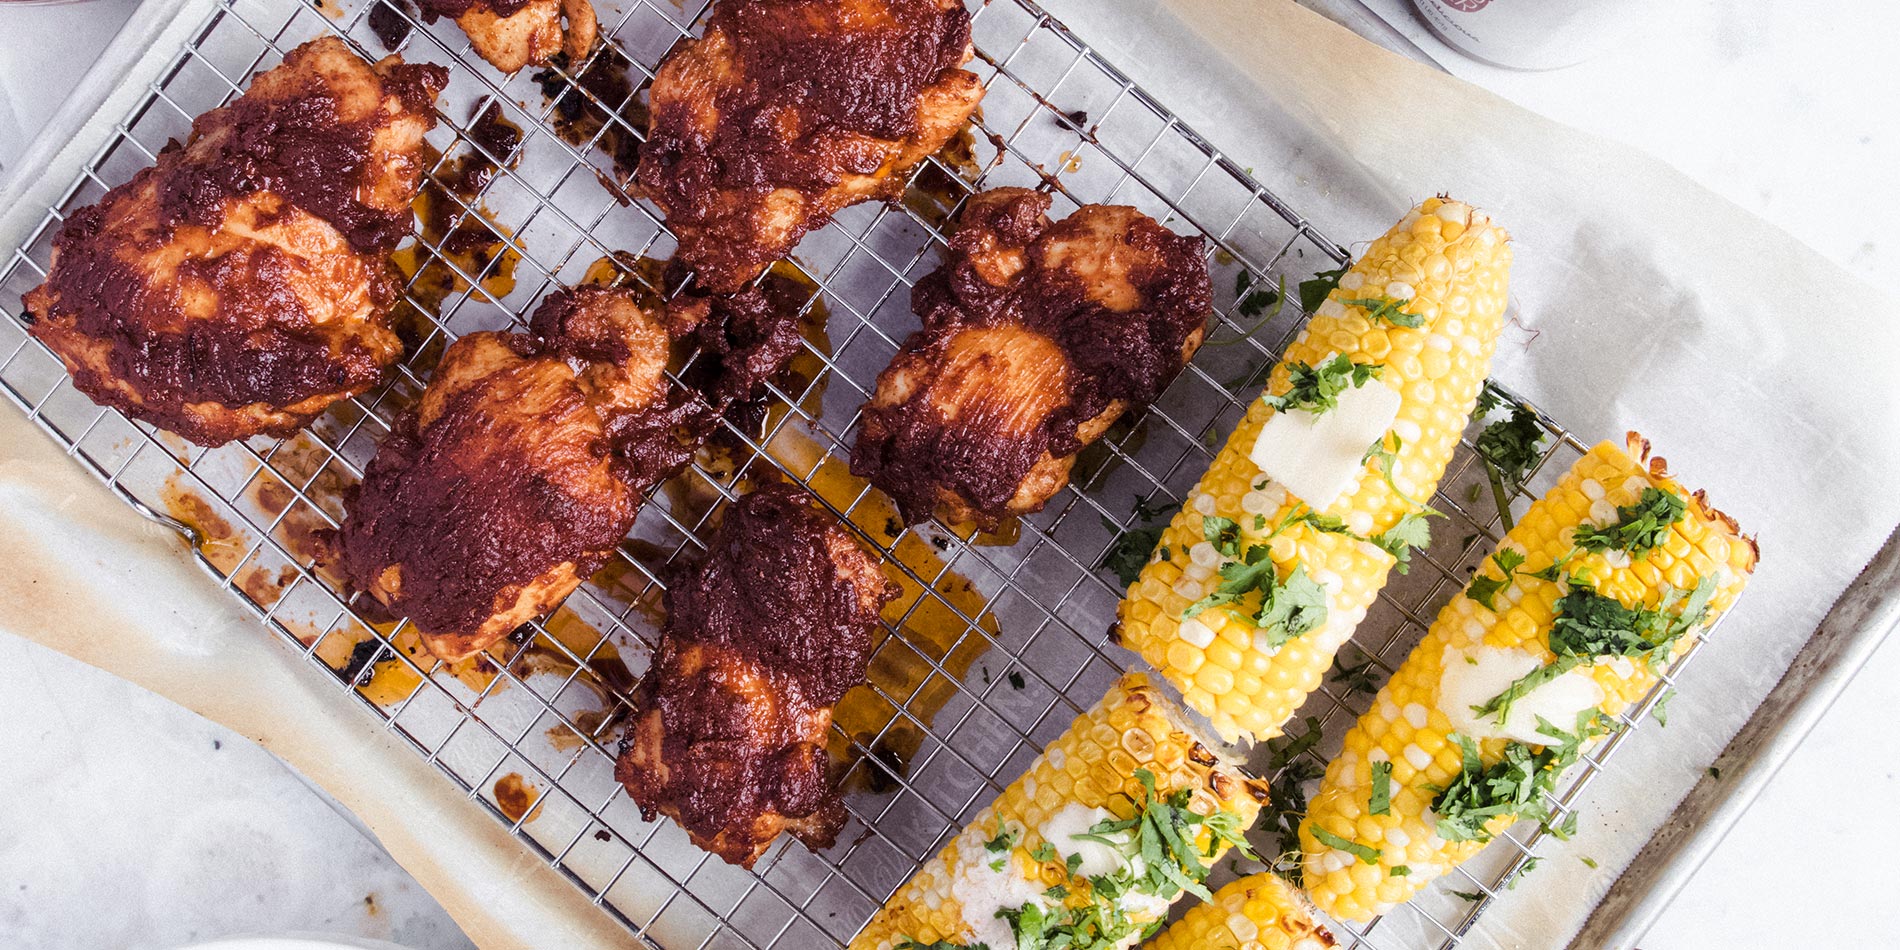 Maple Almond Barbecue Chicken beside some corn on the cob on a cooling rack in a tray with parchment paper